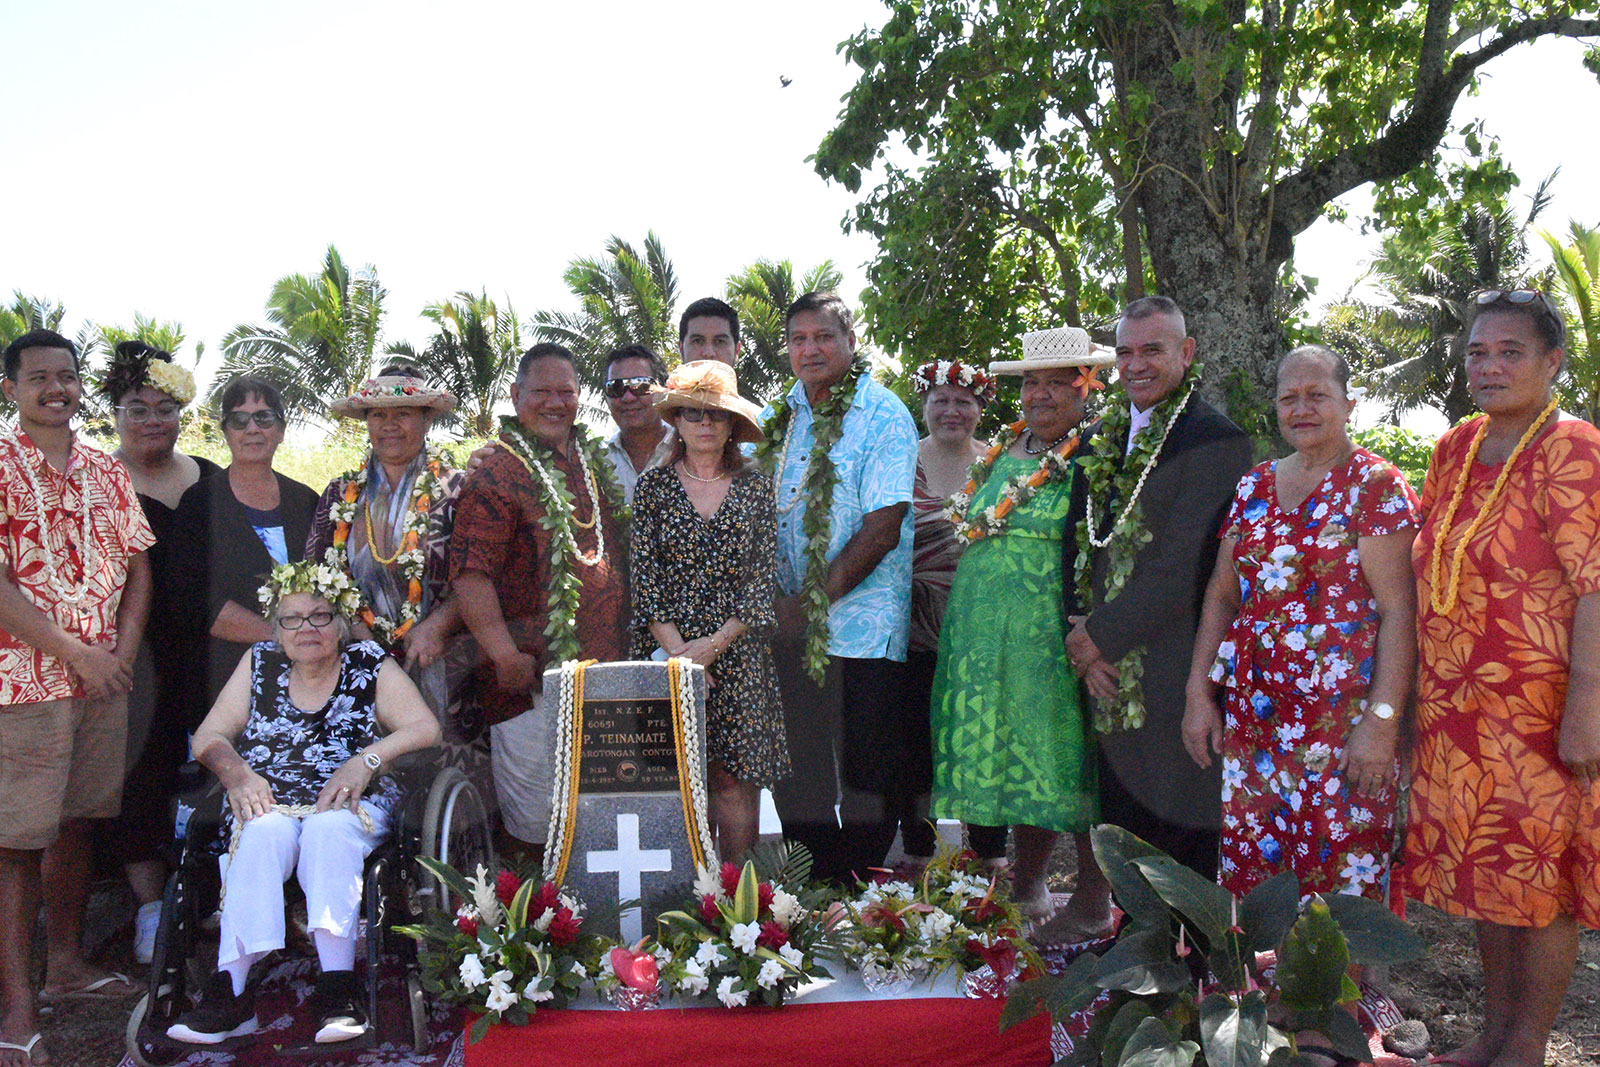 Cook Islands soldier’s sacrifice  remembered at memorial event